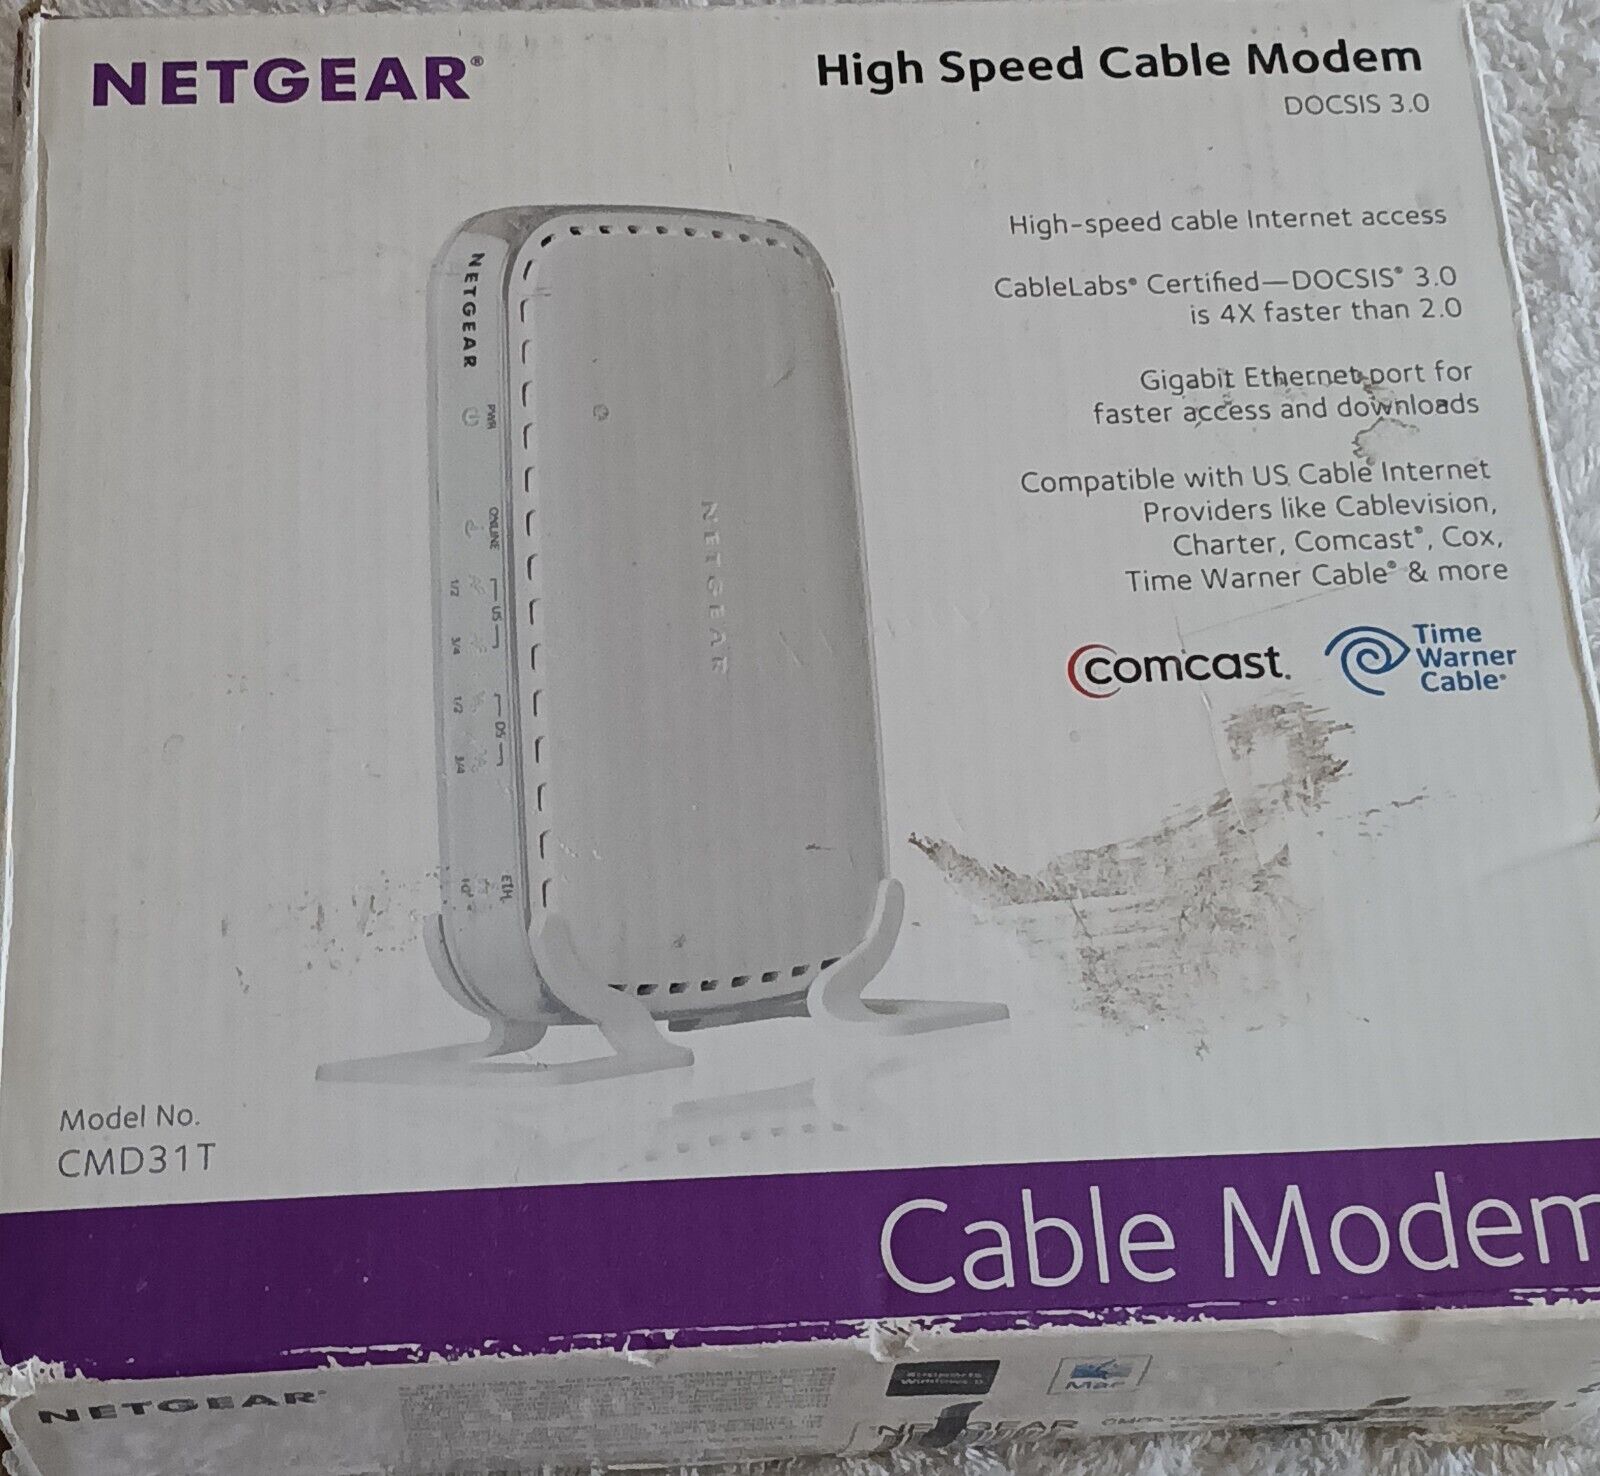 NETGEAR DOCSIS 3.0 - High Speed Cable Modem CMD31T FACTORY SEALED